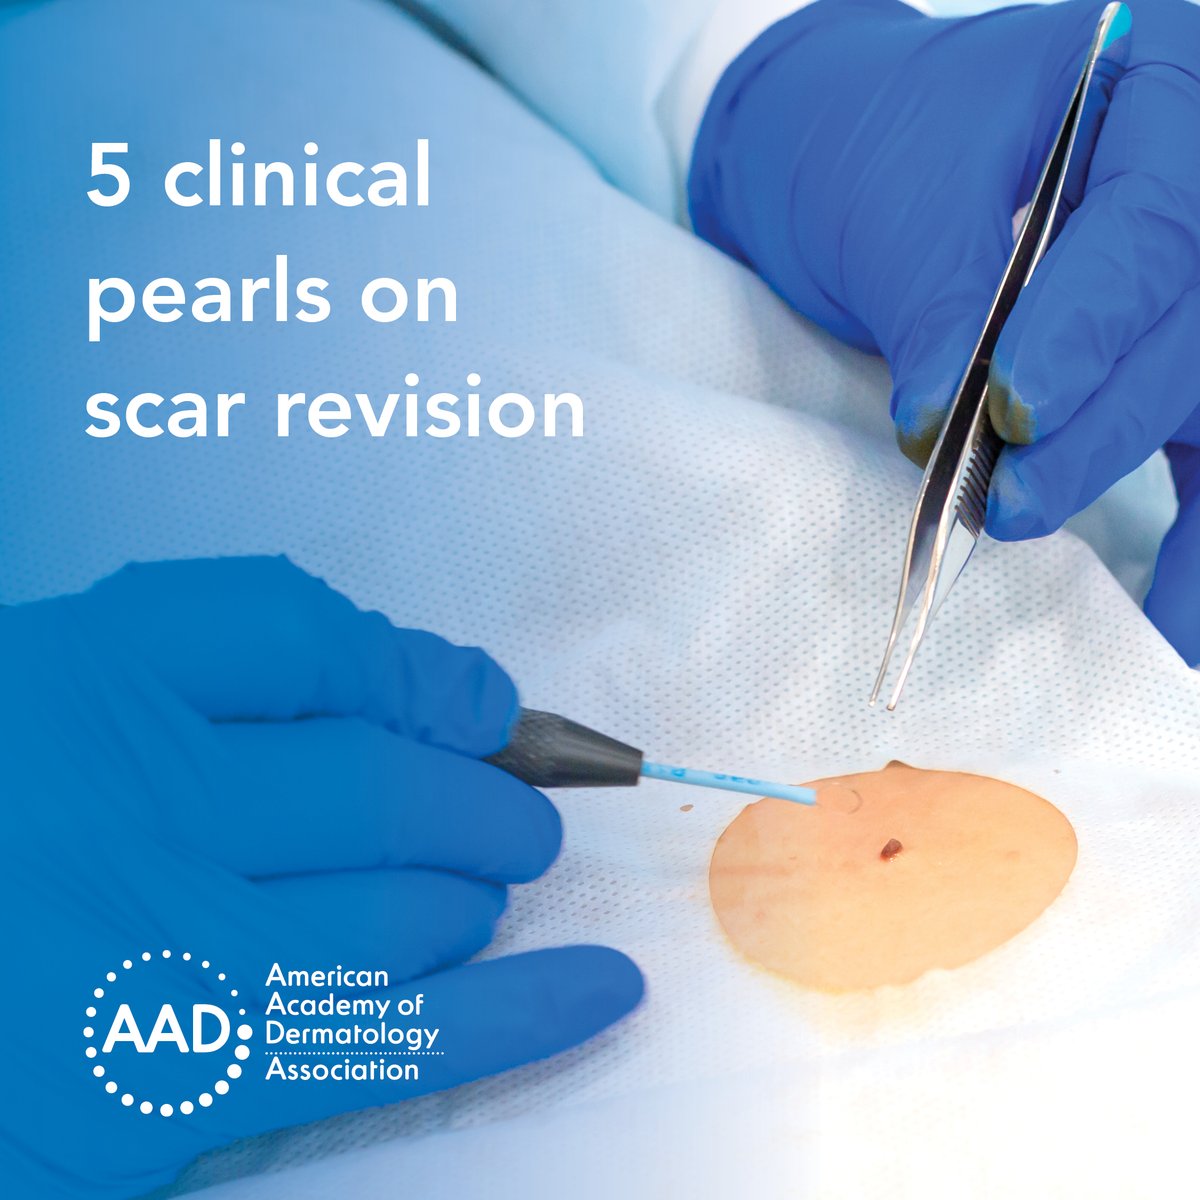 Dr. Harold Higgins provides dermatologists with 5 clinical pearls on #scarrevision in the fall issue of #DermWorld Directions in Residency. bit.ly/3RNqouU